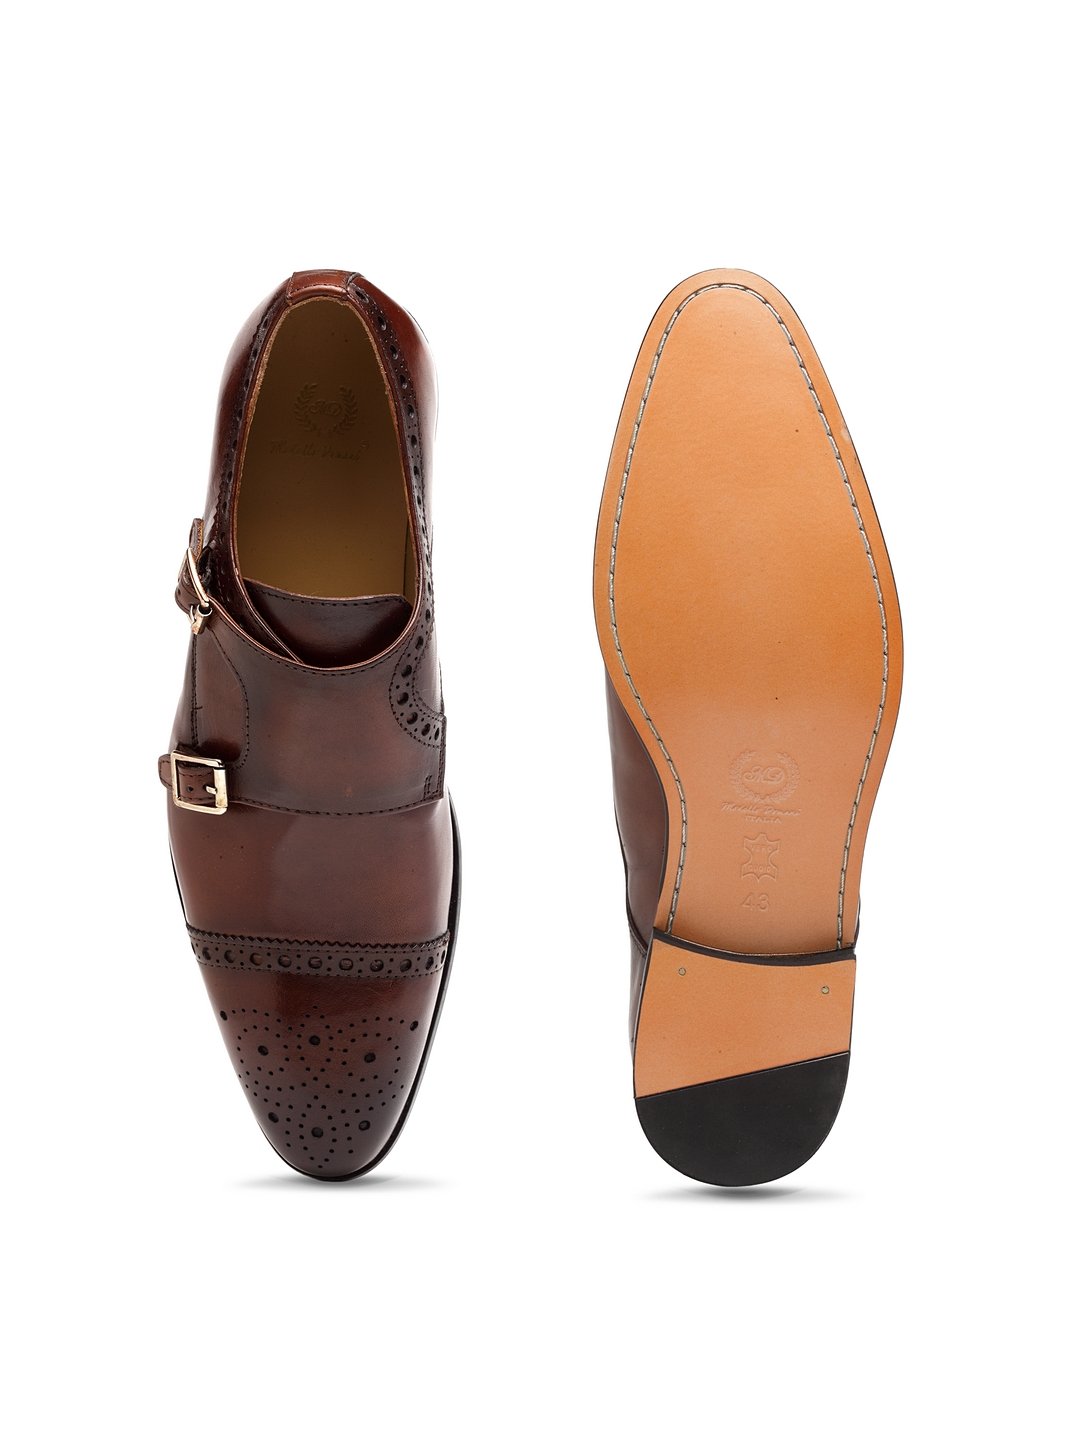 Italia Leather Double Monk Brogues (Cherry Brown)